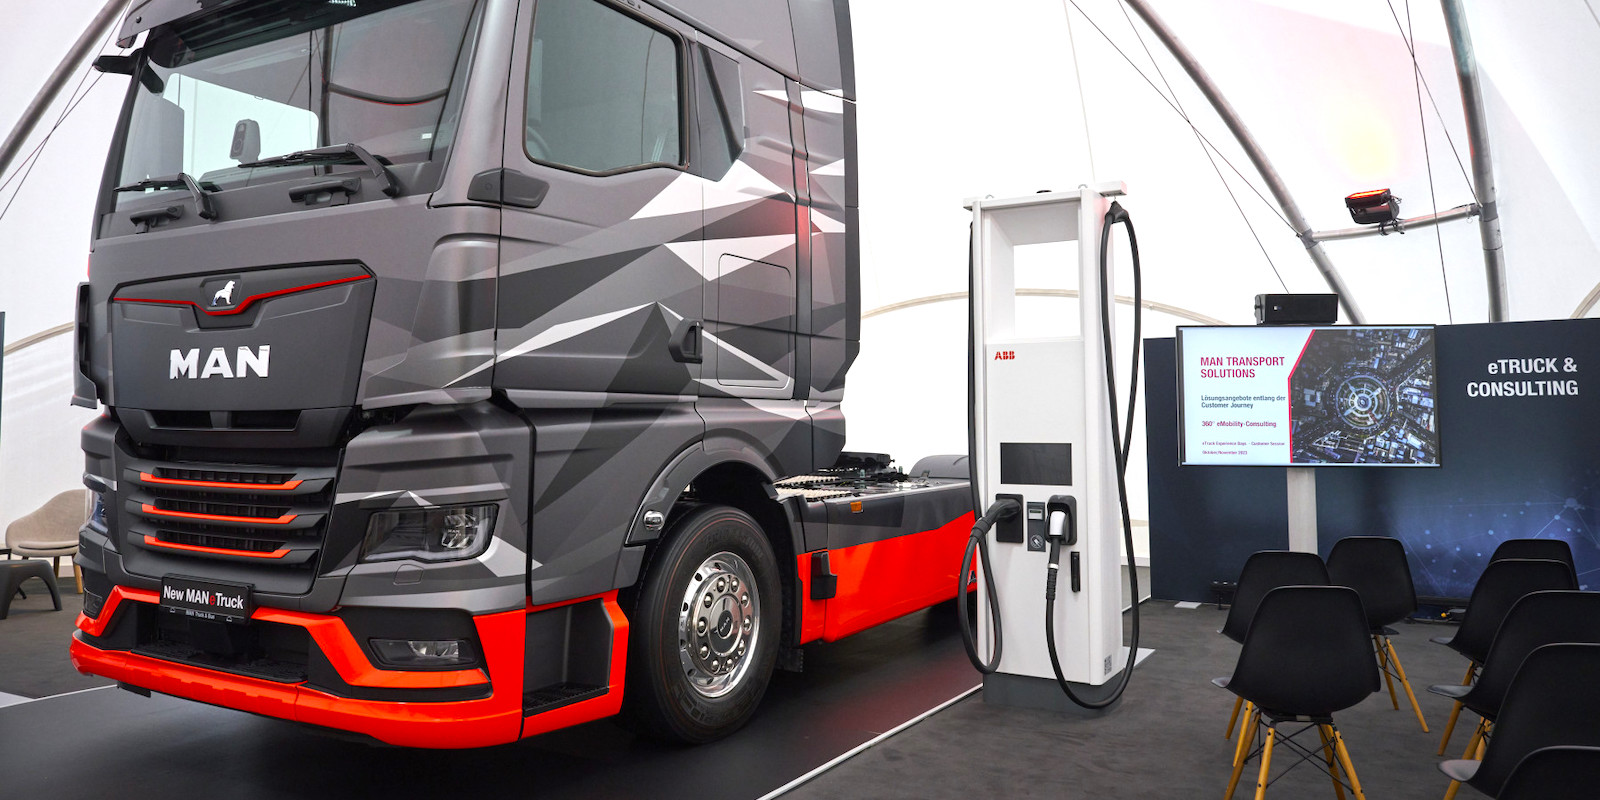 Megawatt charging and more: MAN and ABB E-mobility announce R&D cooperation